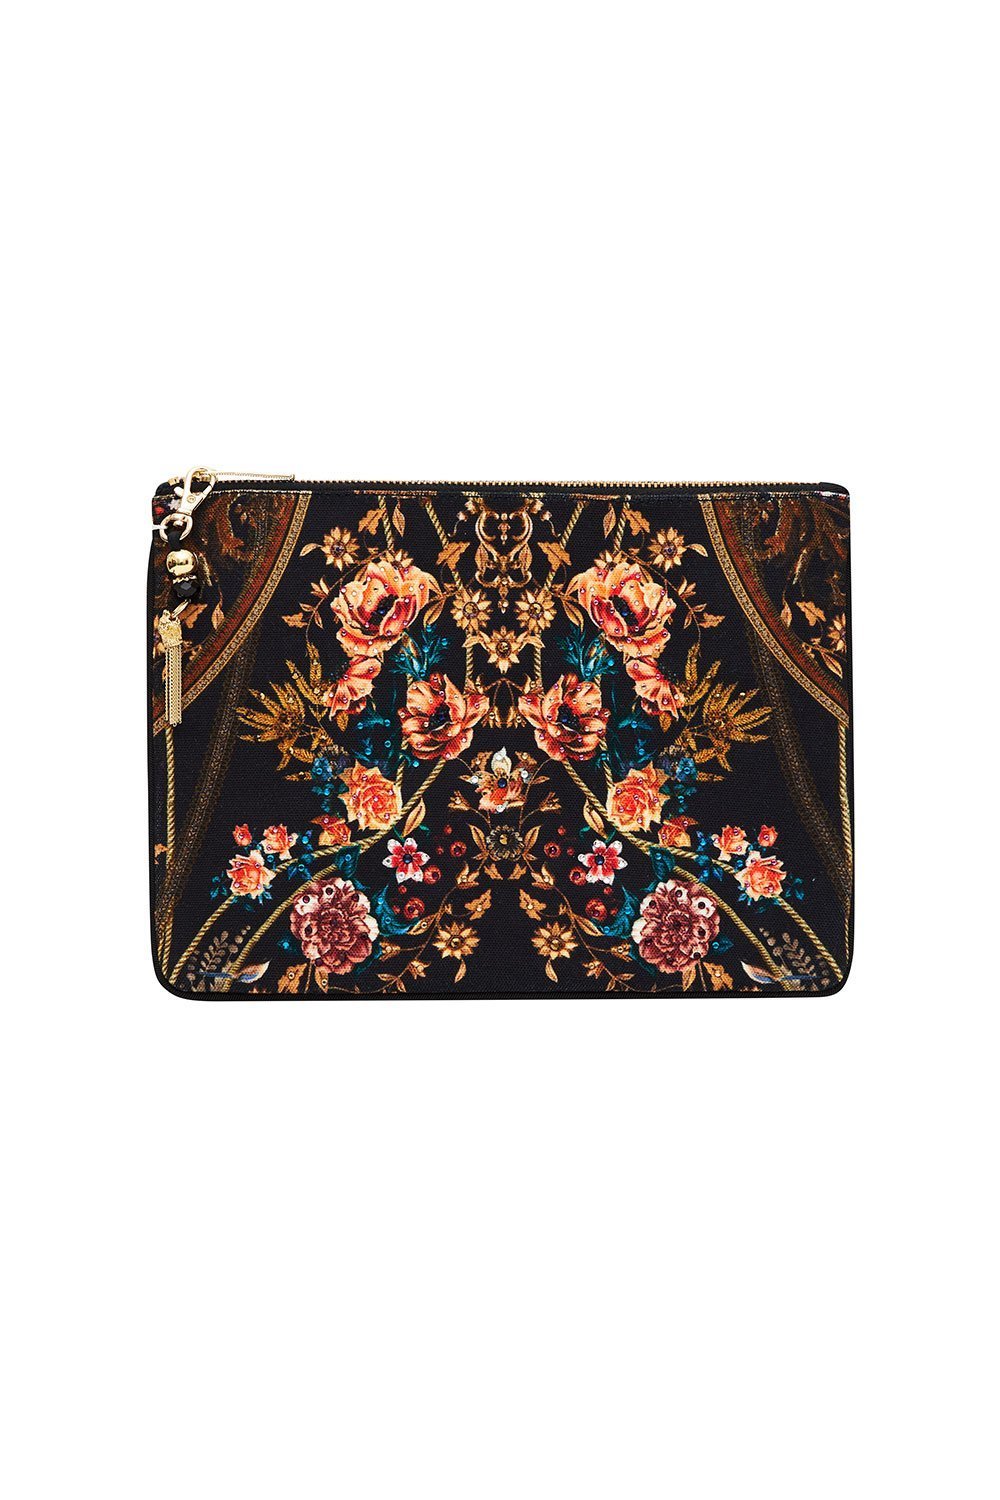 SMALL CANVAS CLUTCH BELLE OF THE BAROQUE